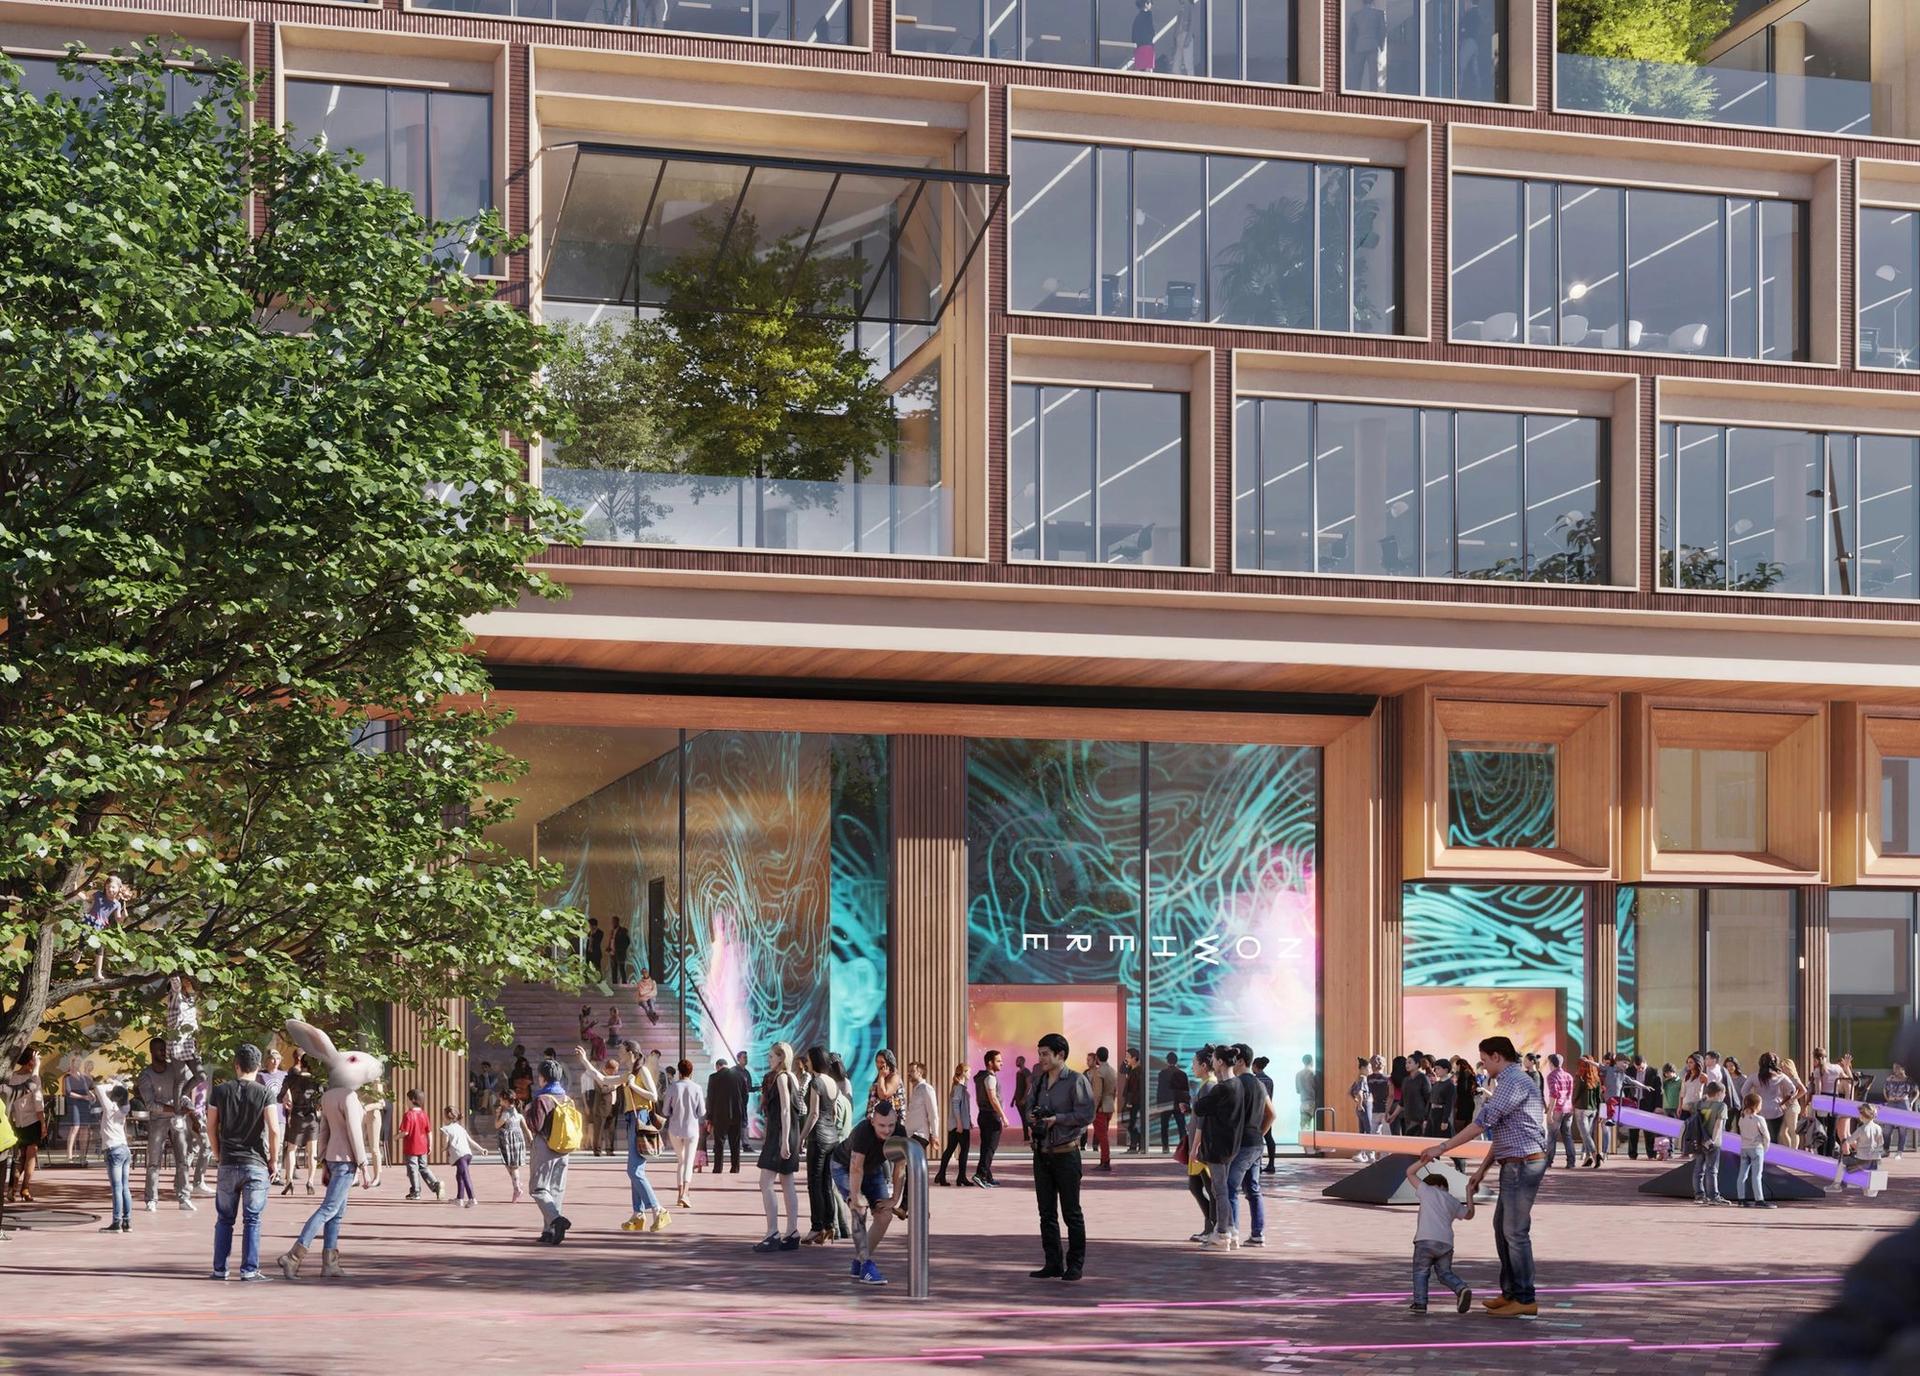 Nowhere will be located on the ground floor of Wonderwoods, a property development in central Utrecht that is due to break ground this autumn 